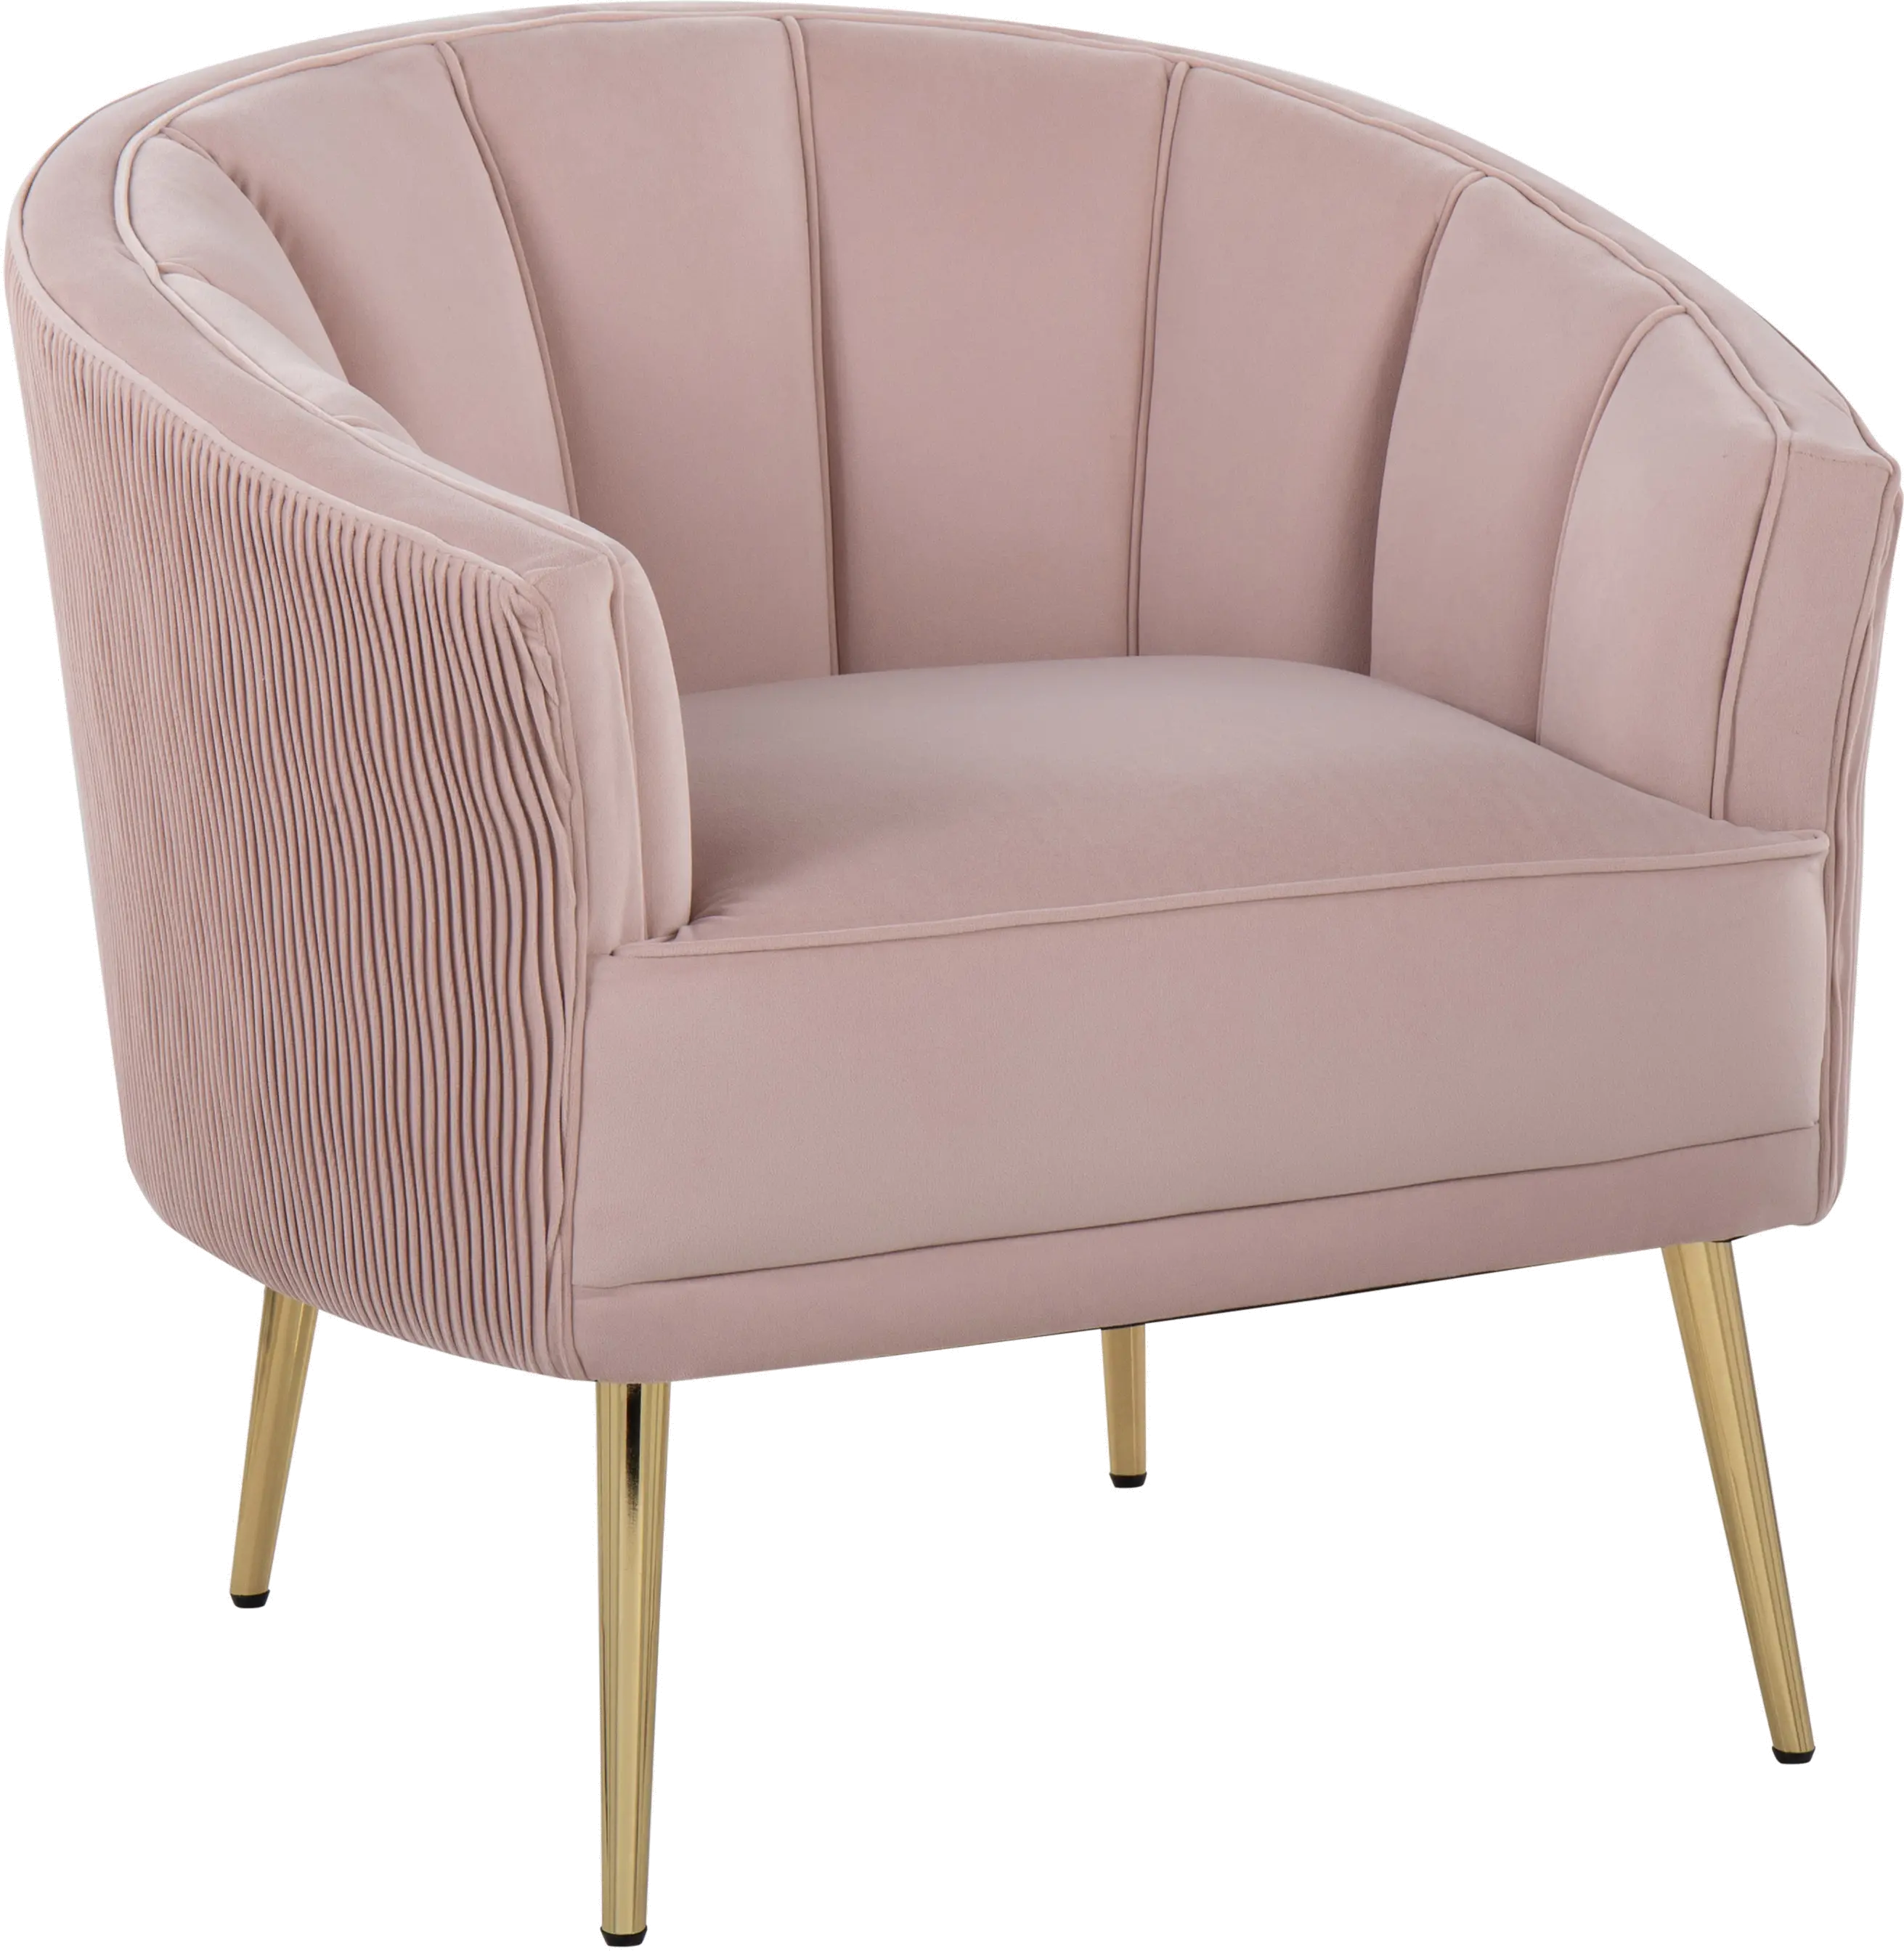 CHR-TANIAPLTWVAUVPK Tania Blush Pleated Waves Glam Accent Chair sku CHR-TANIAPLTWVAUVPK